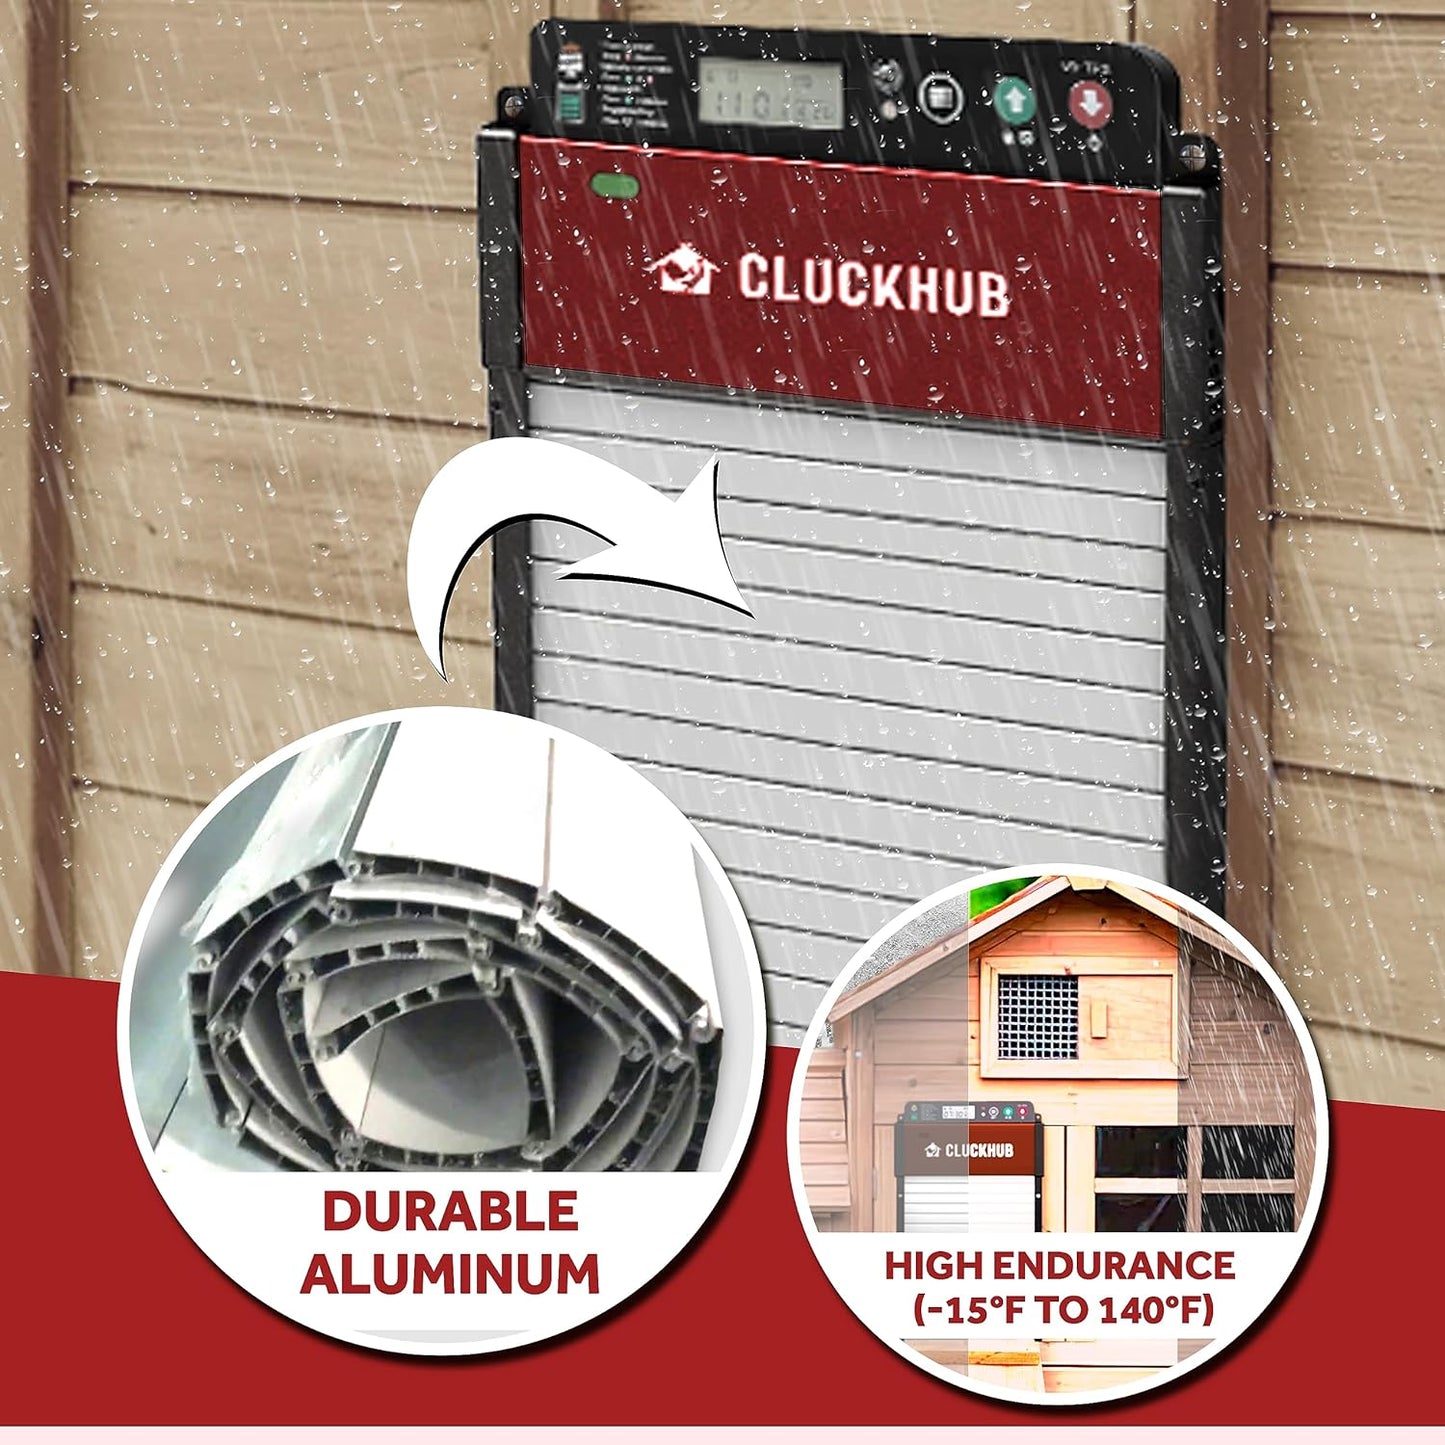 CluckHub Automatic Chicken Coop Door - Solar Powered, Electric Opener, Light Sensor w/Timer, Anti-Trap, Multi-Modes | Aluminum, Weather-Resistant | Own Control Panel w/Remote Control, Red (Red)